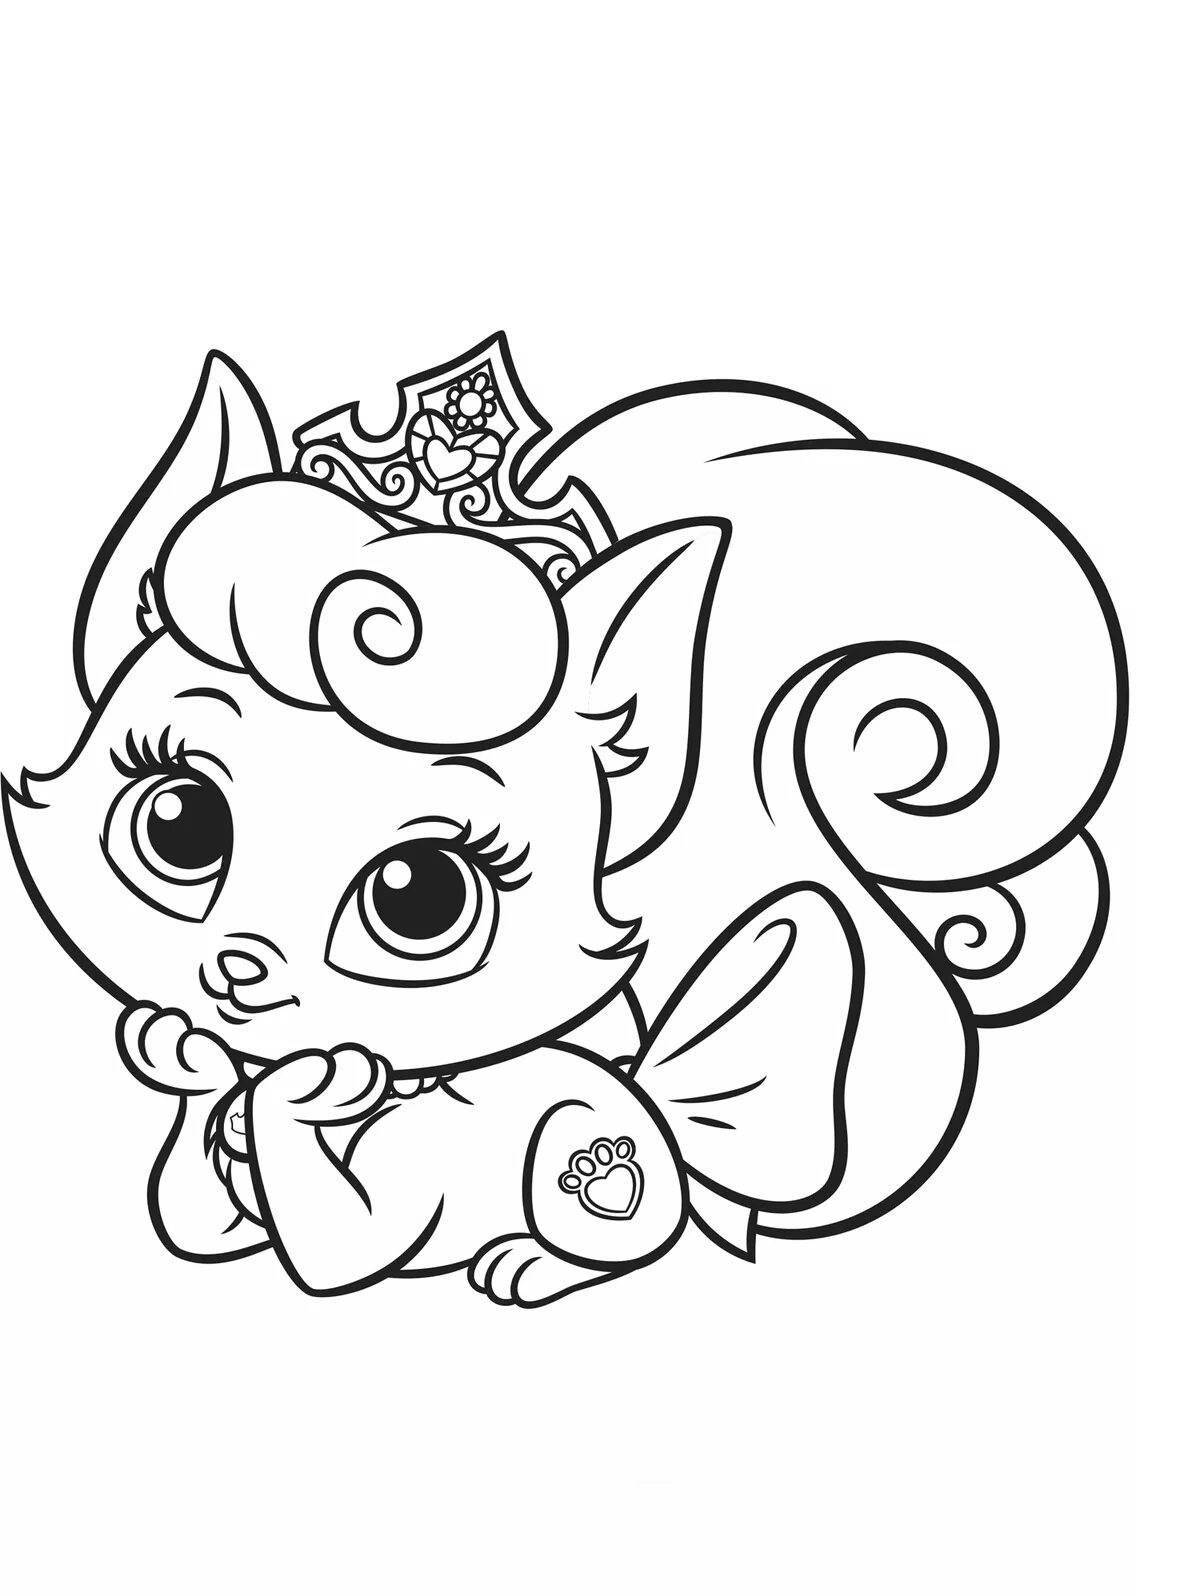 Cute furry friends coloring page